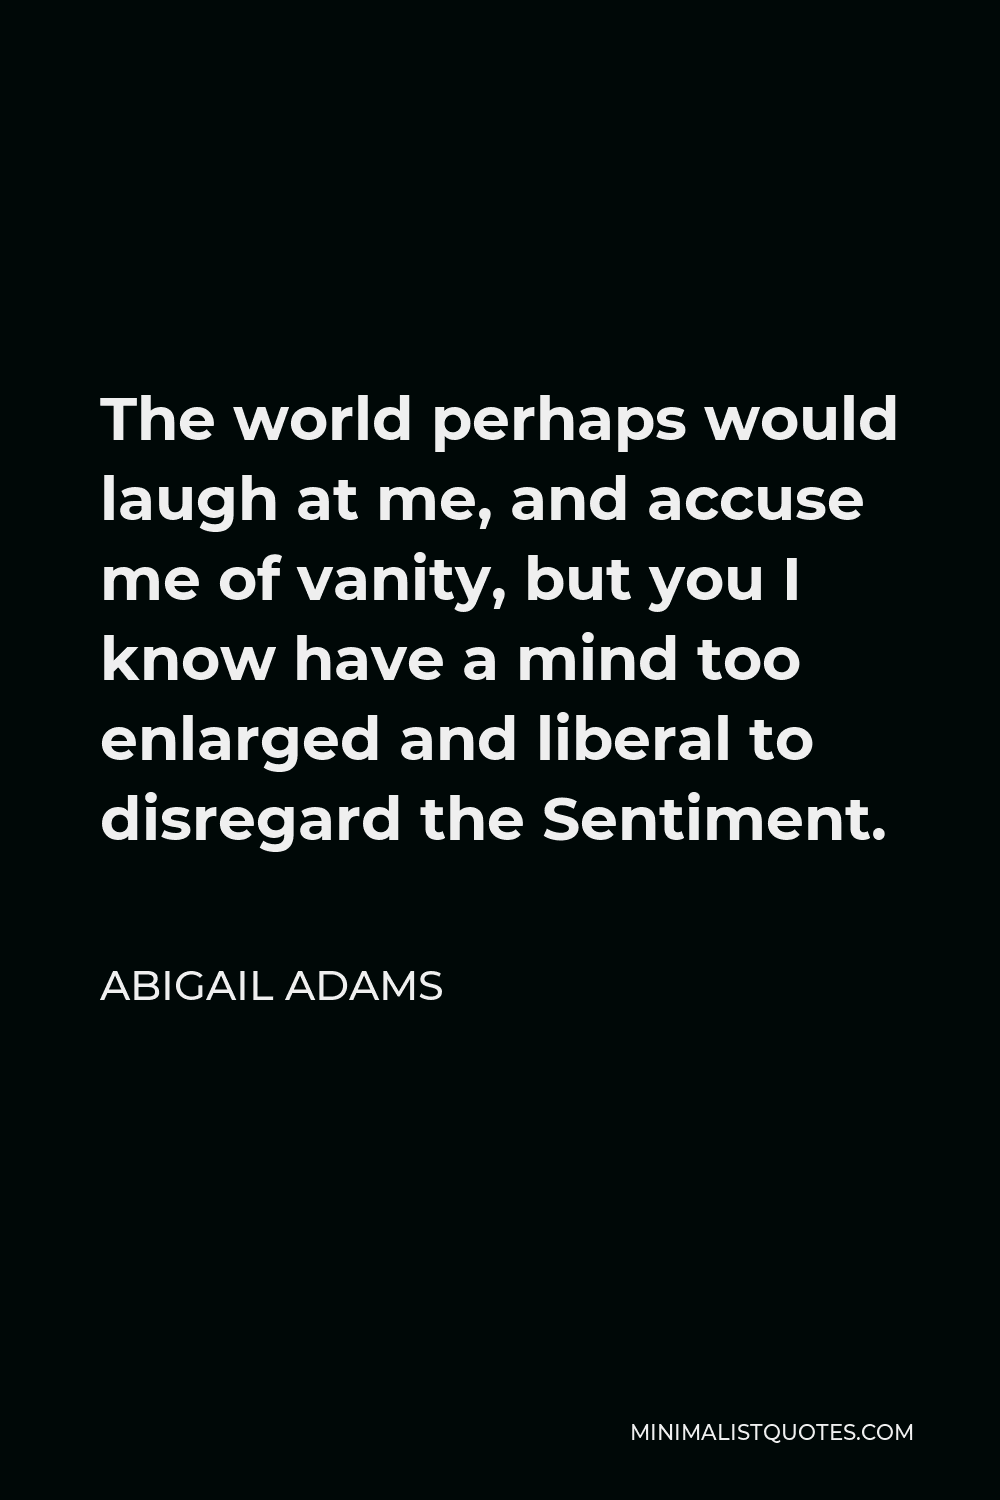 Abigail Adams Quote - The world perhaps would laugh at me, and accuse me of vanity, but you I know have a mind too enlarged and liberal to disregard the Sentiment.